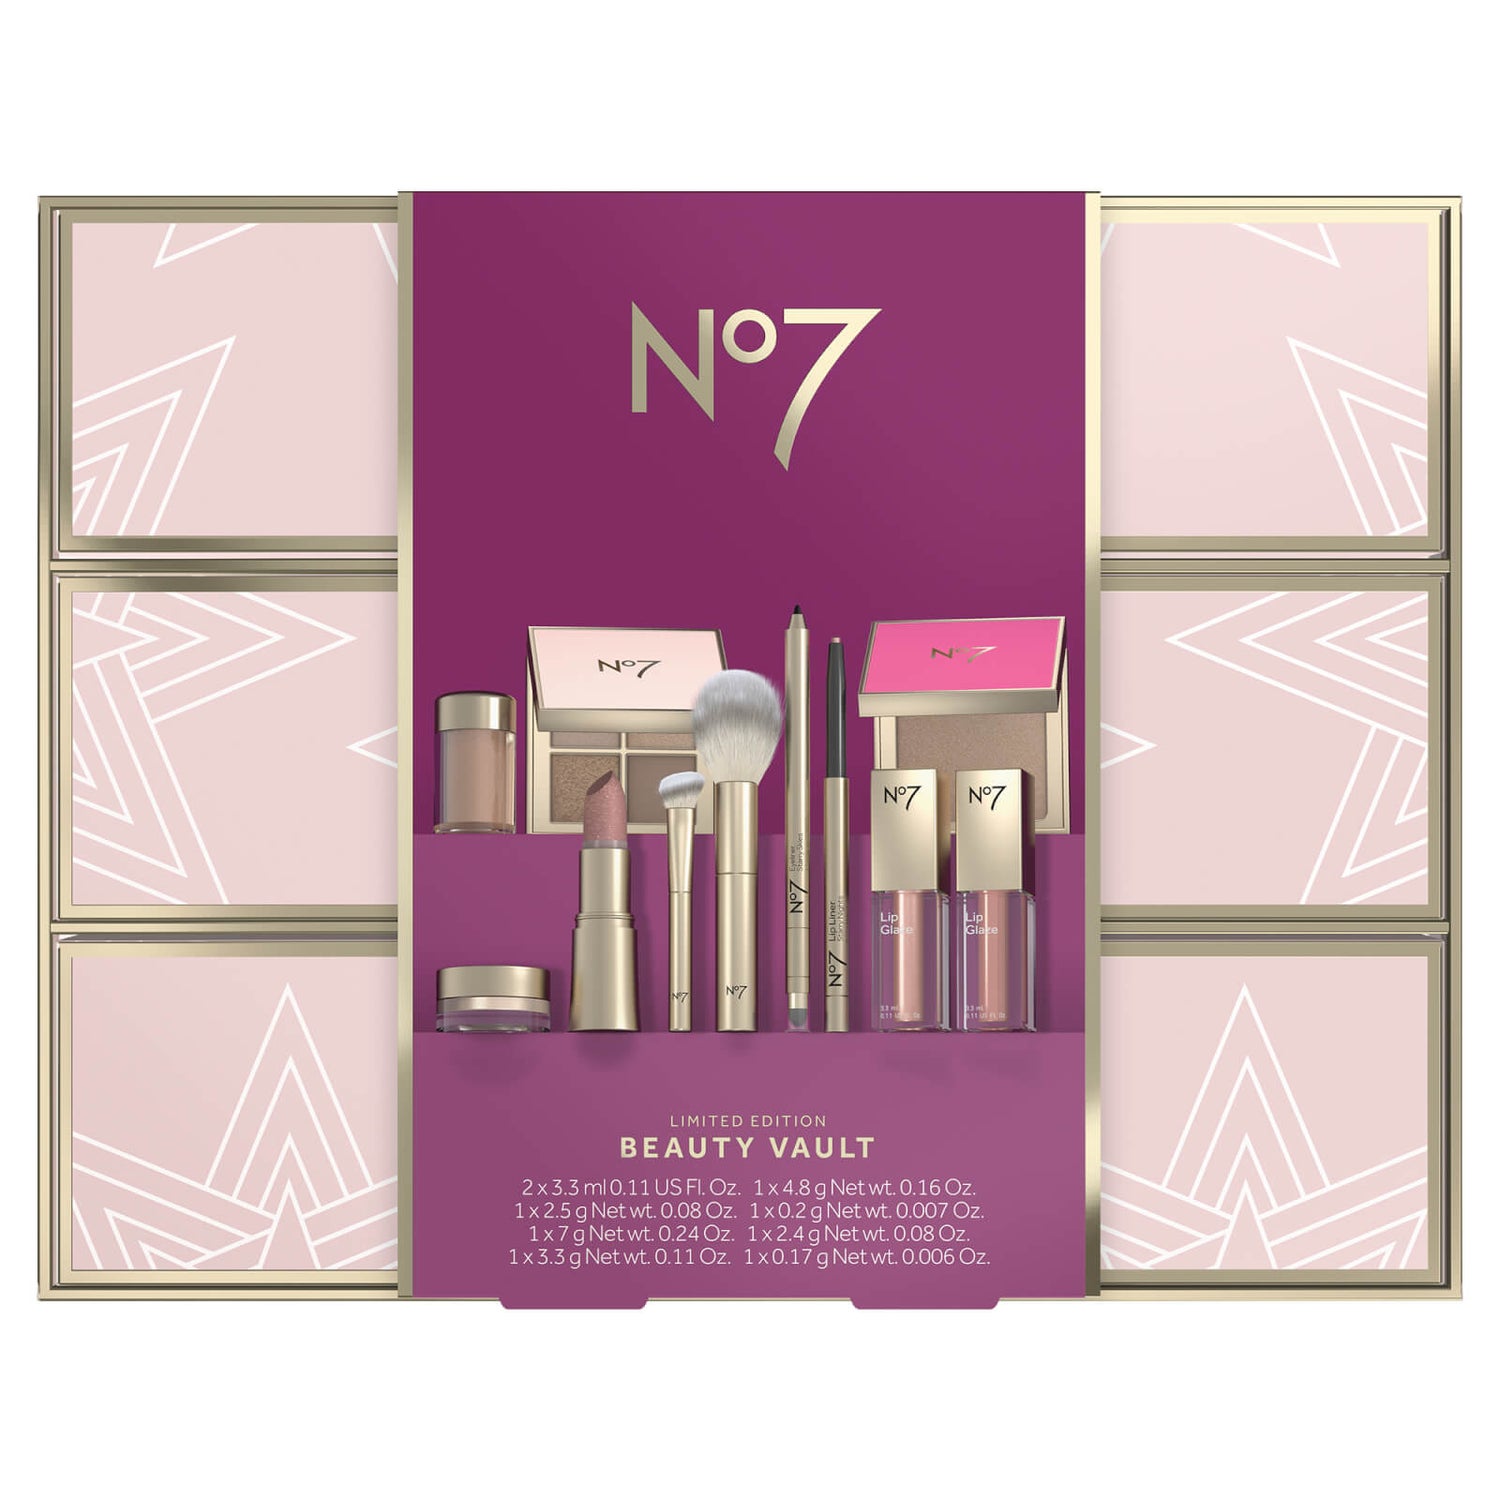 Limited Edition Beauty Vault